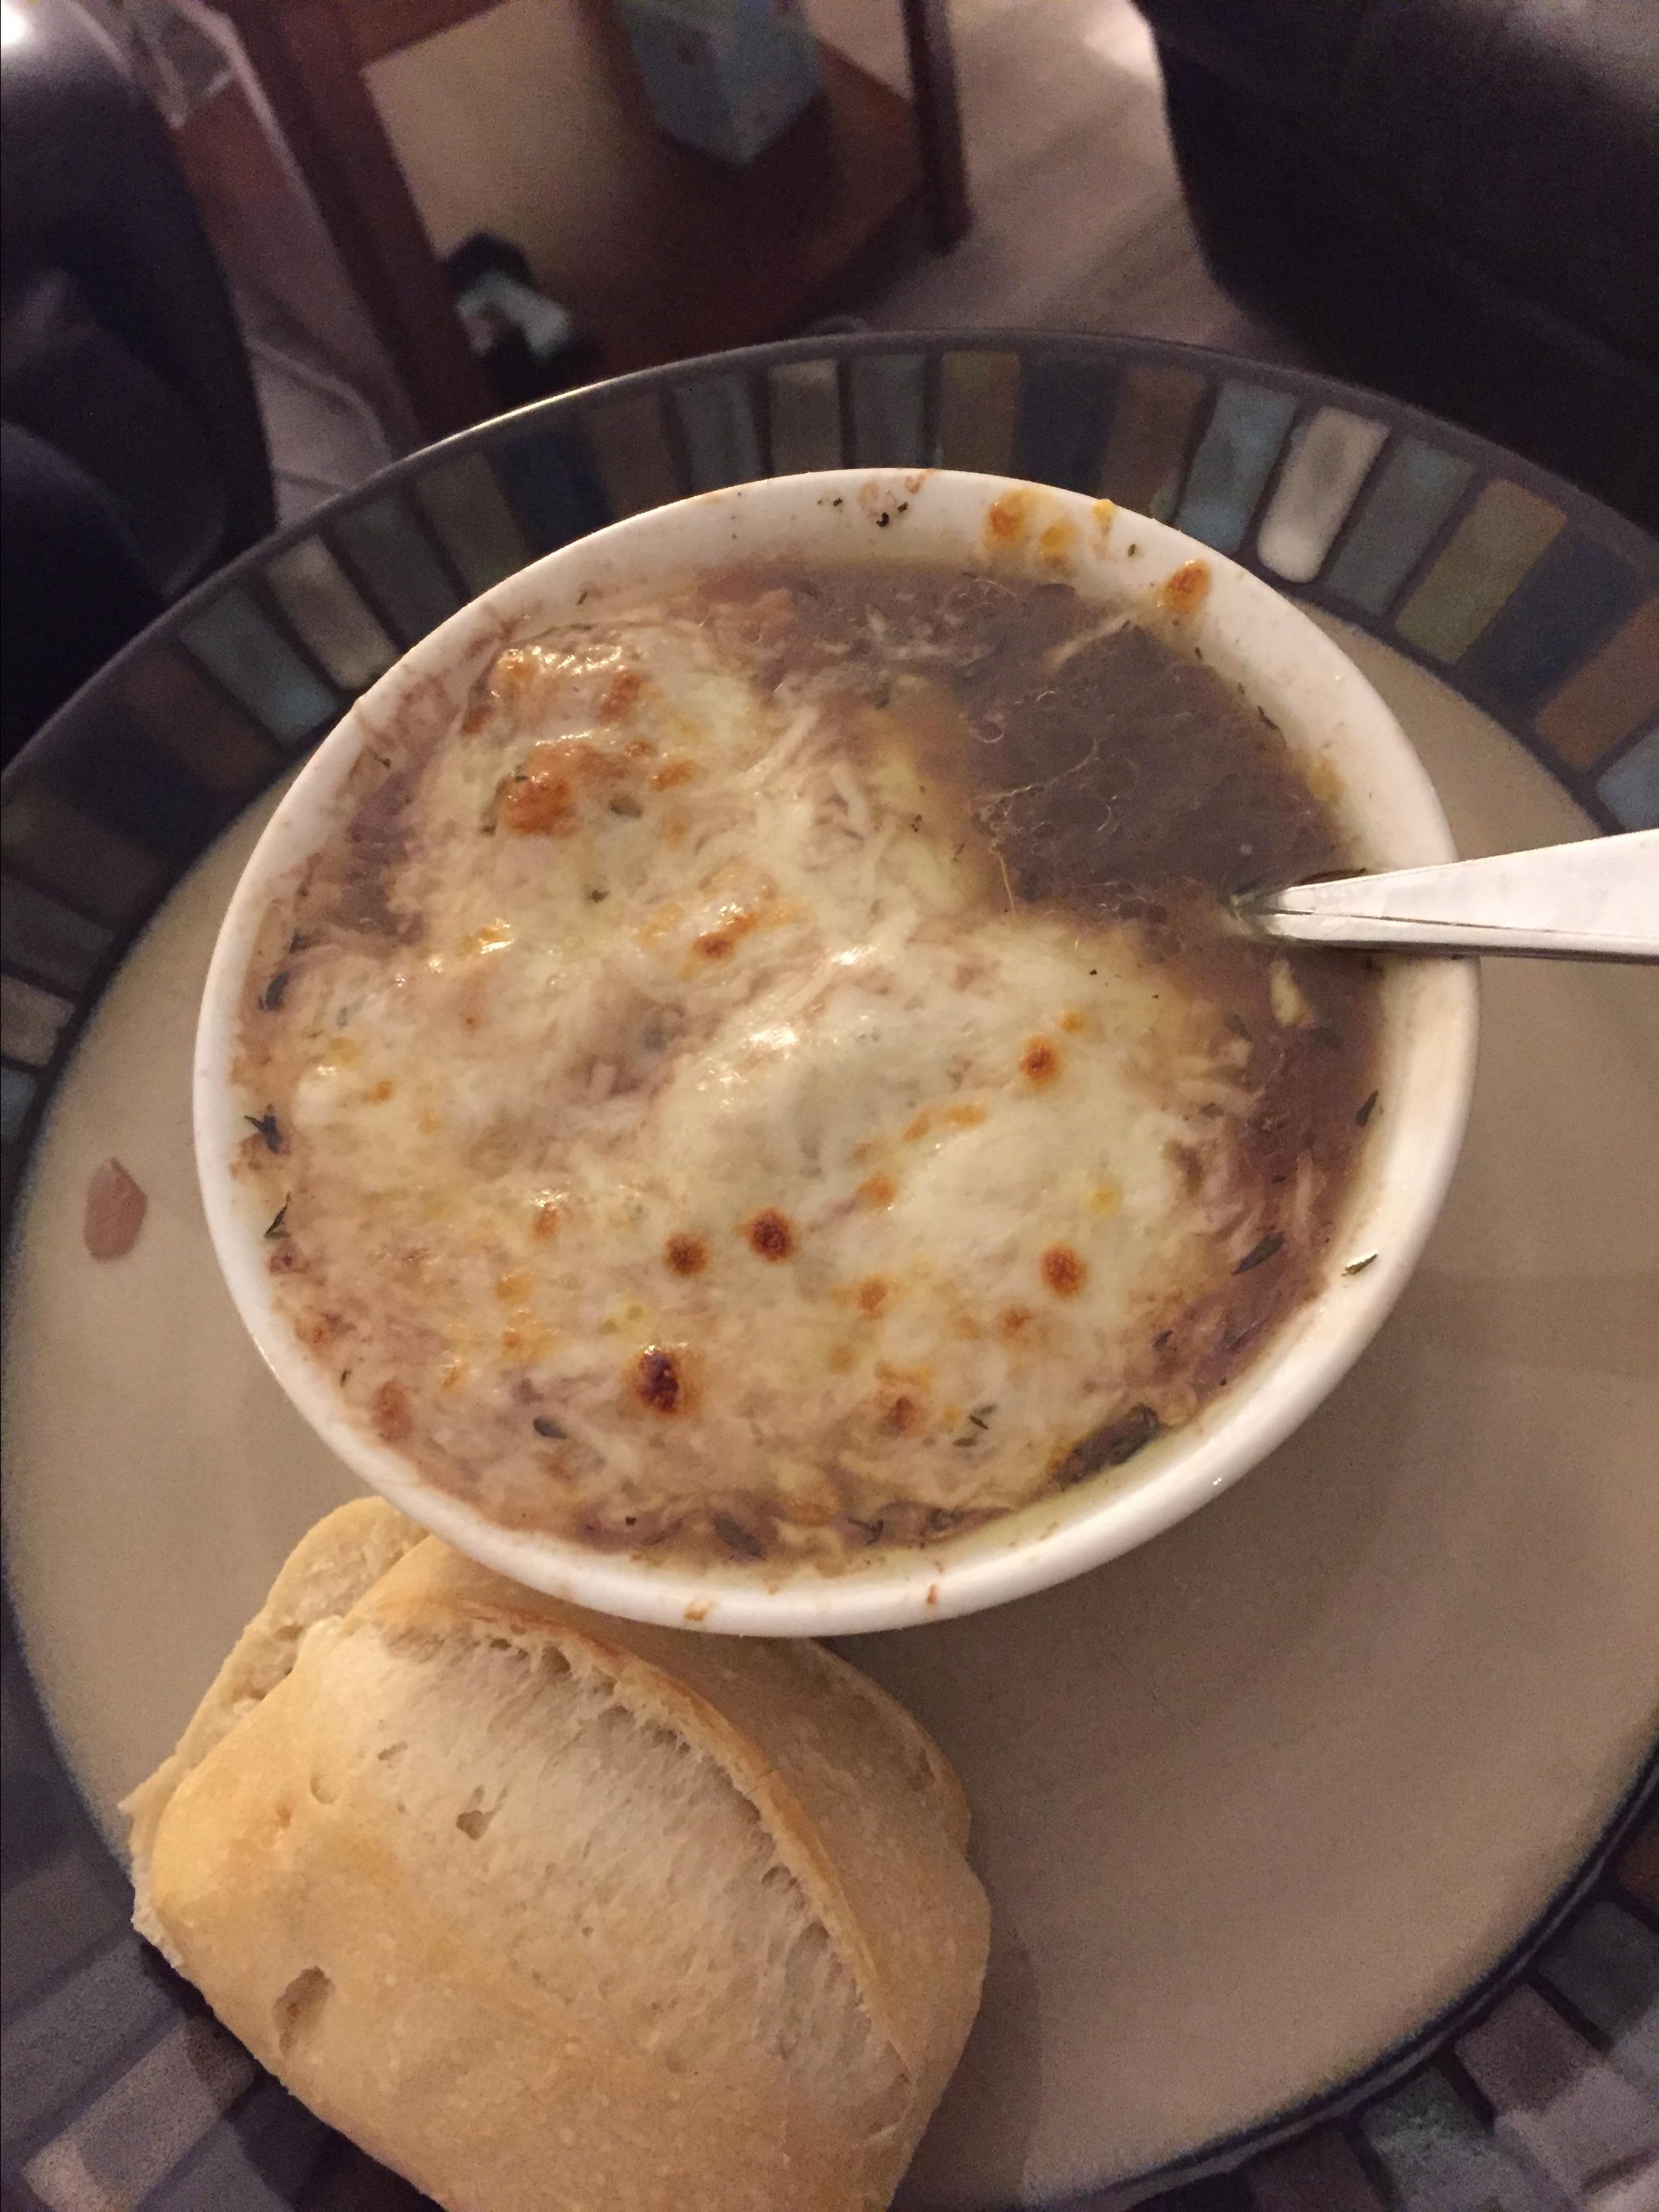 Restaurant-Style French Onion Soup 